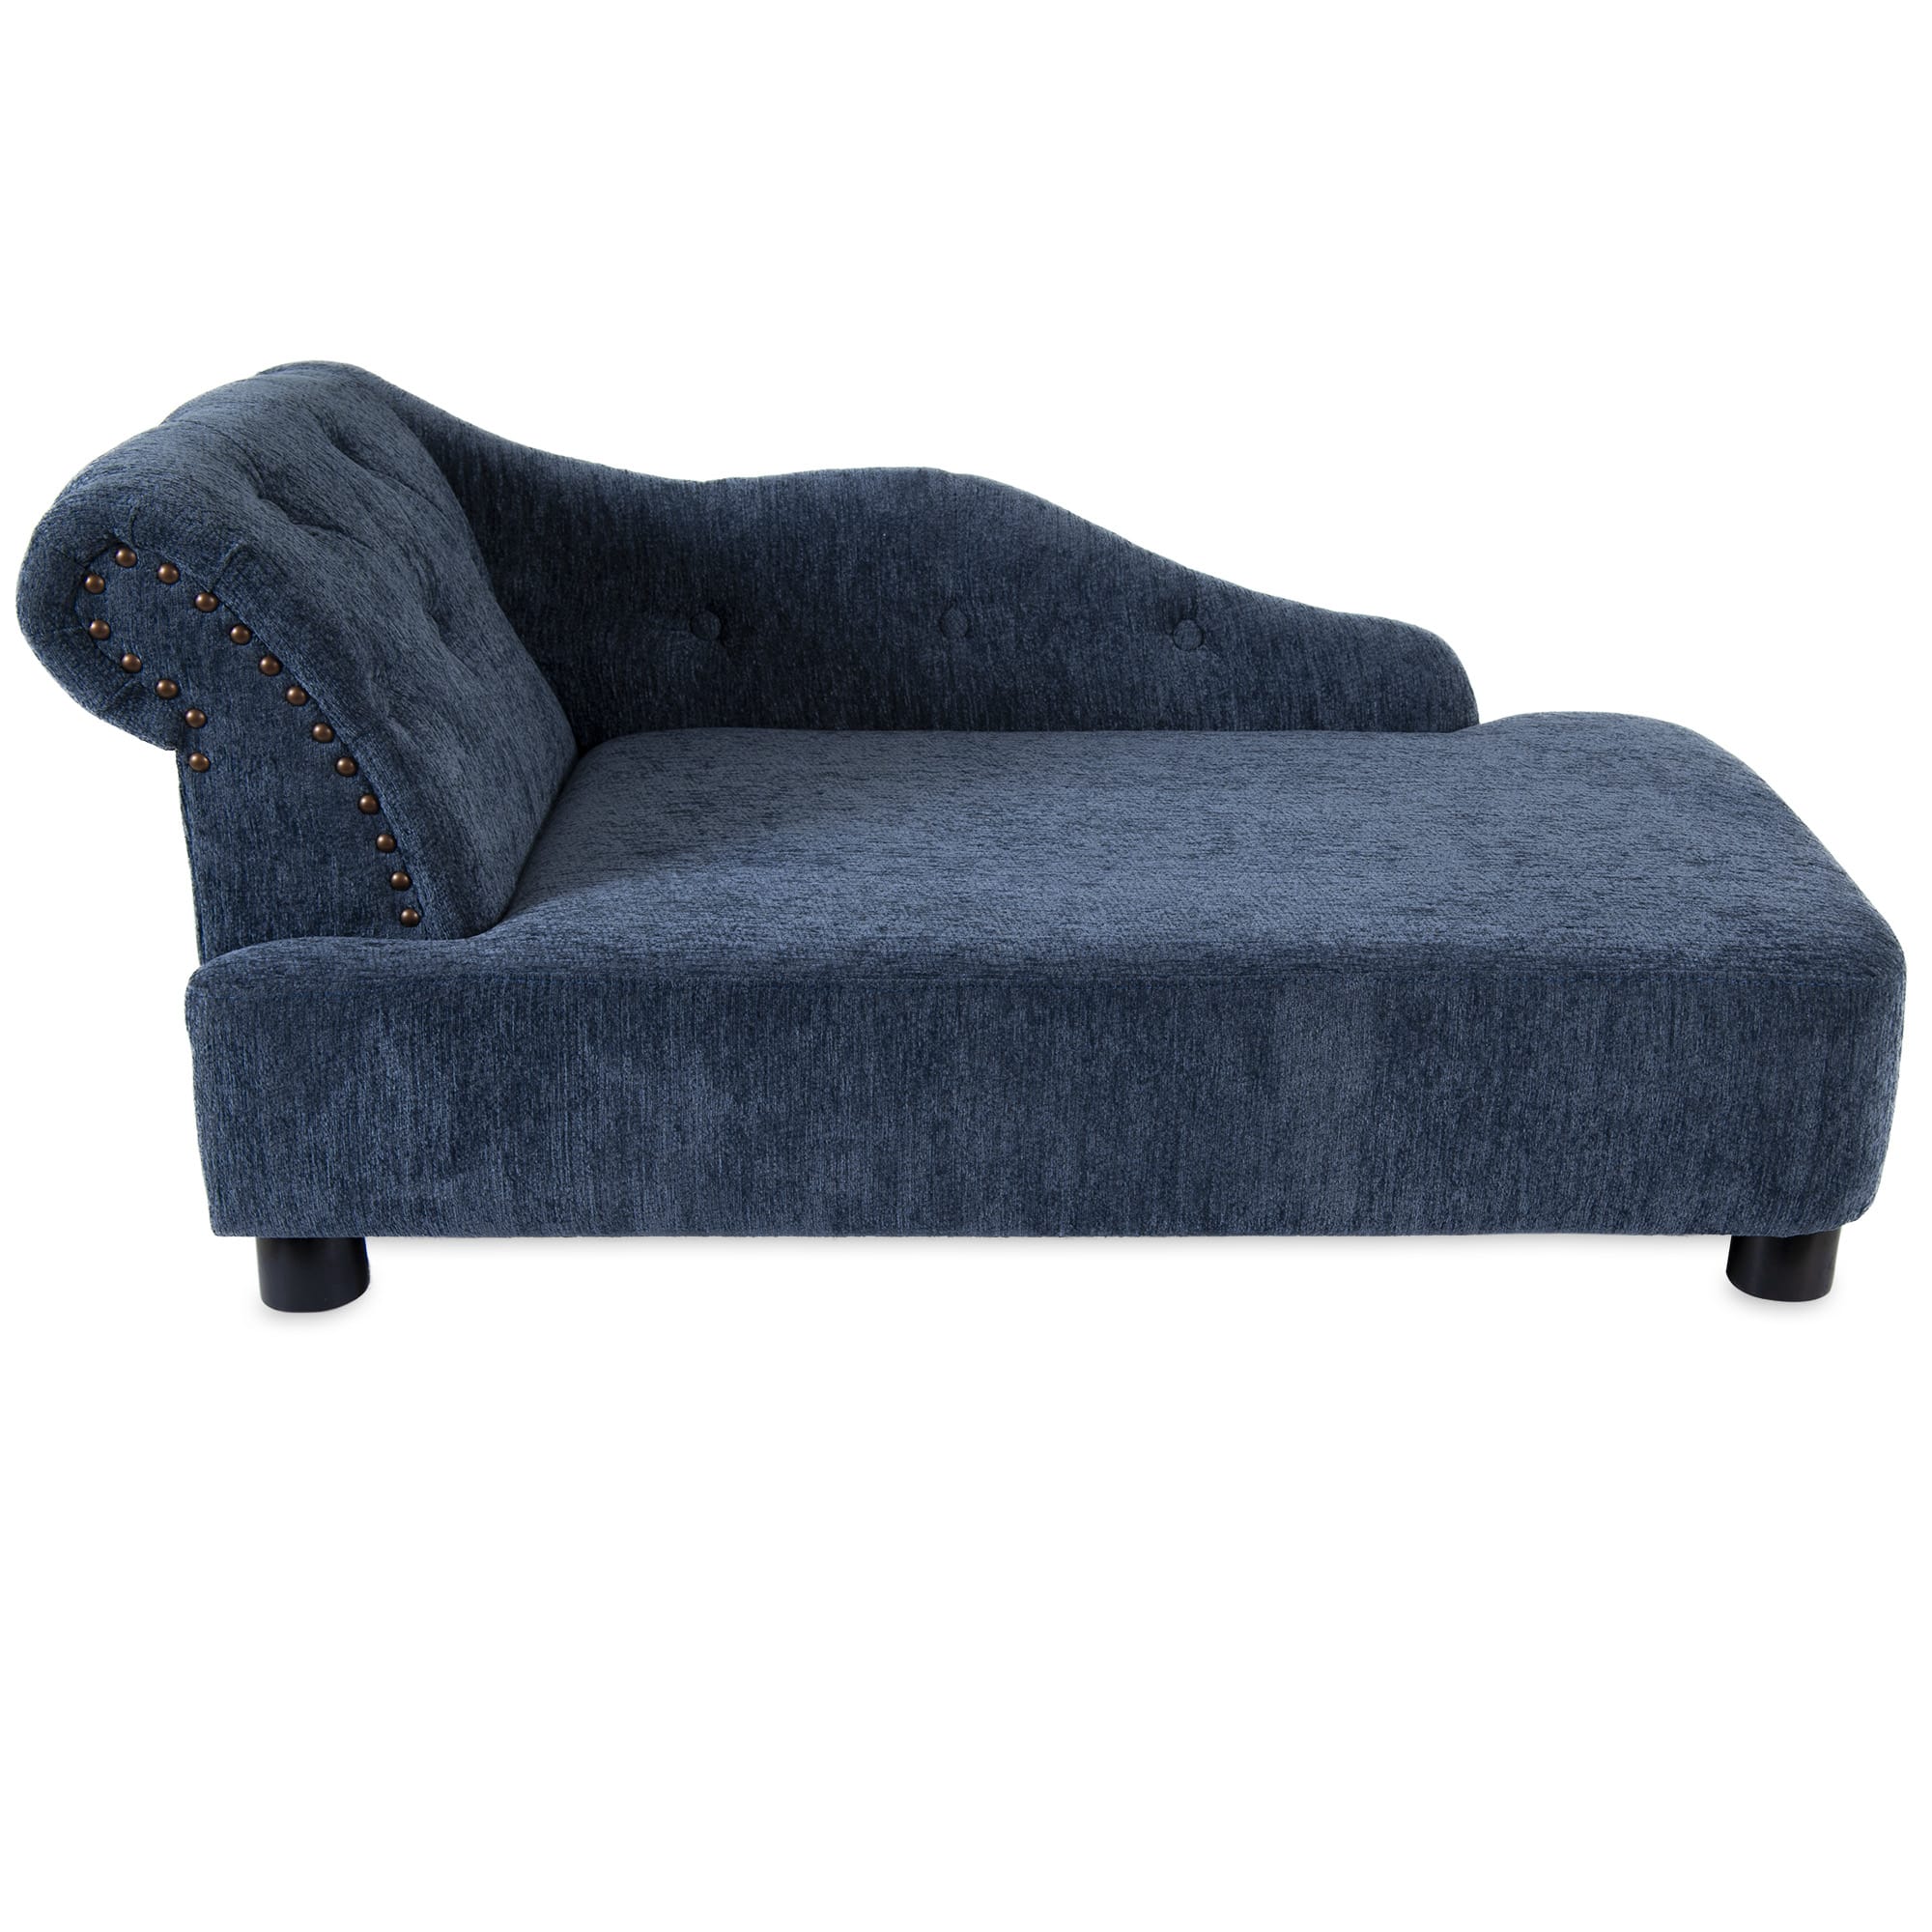 Details about   Blue Storage Chaise Lounge Chaises Bench Lounges Settee Chair Chairs Furniture 